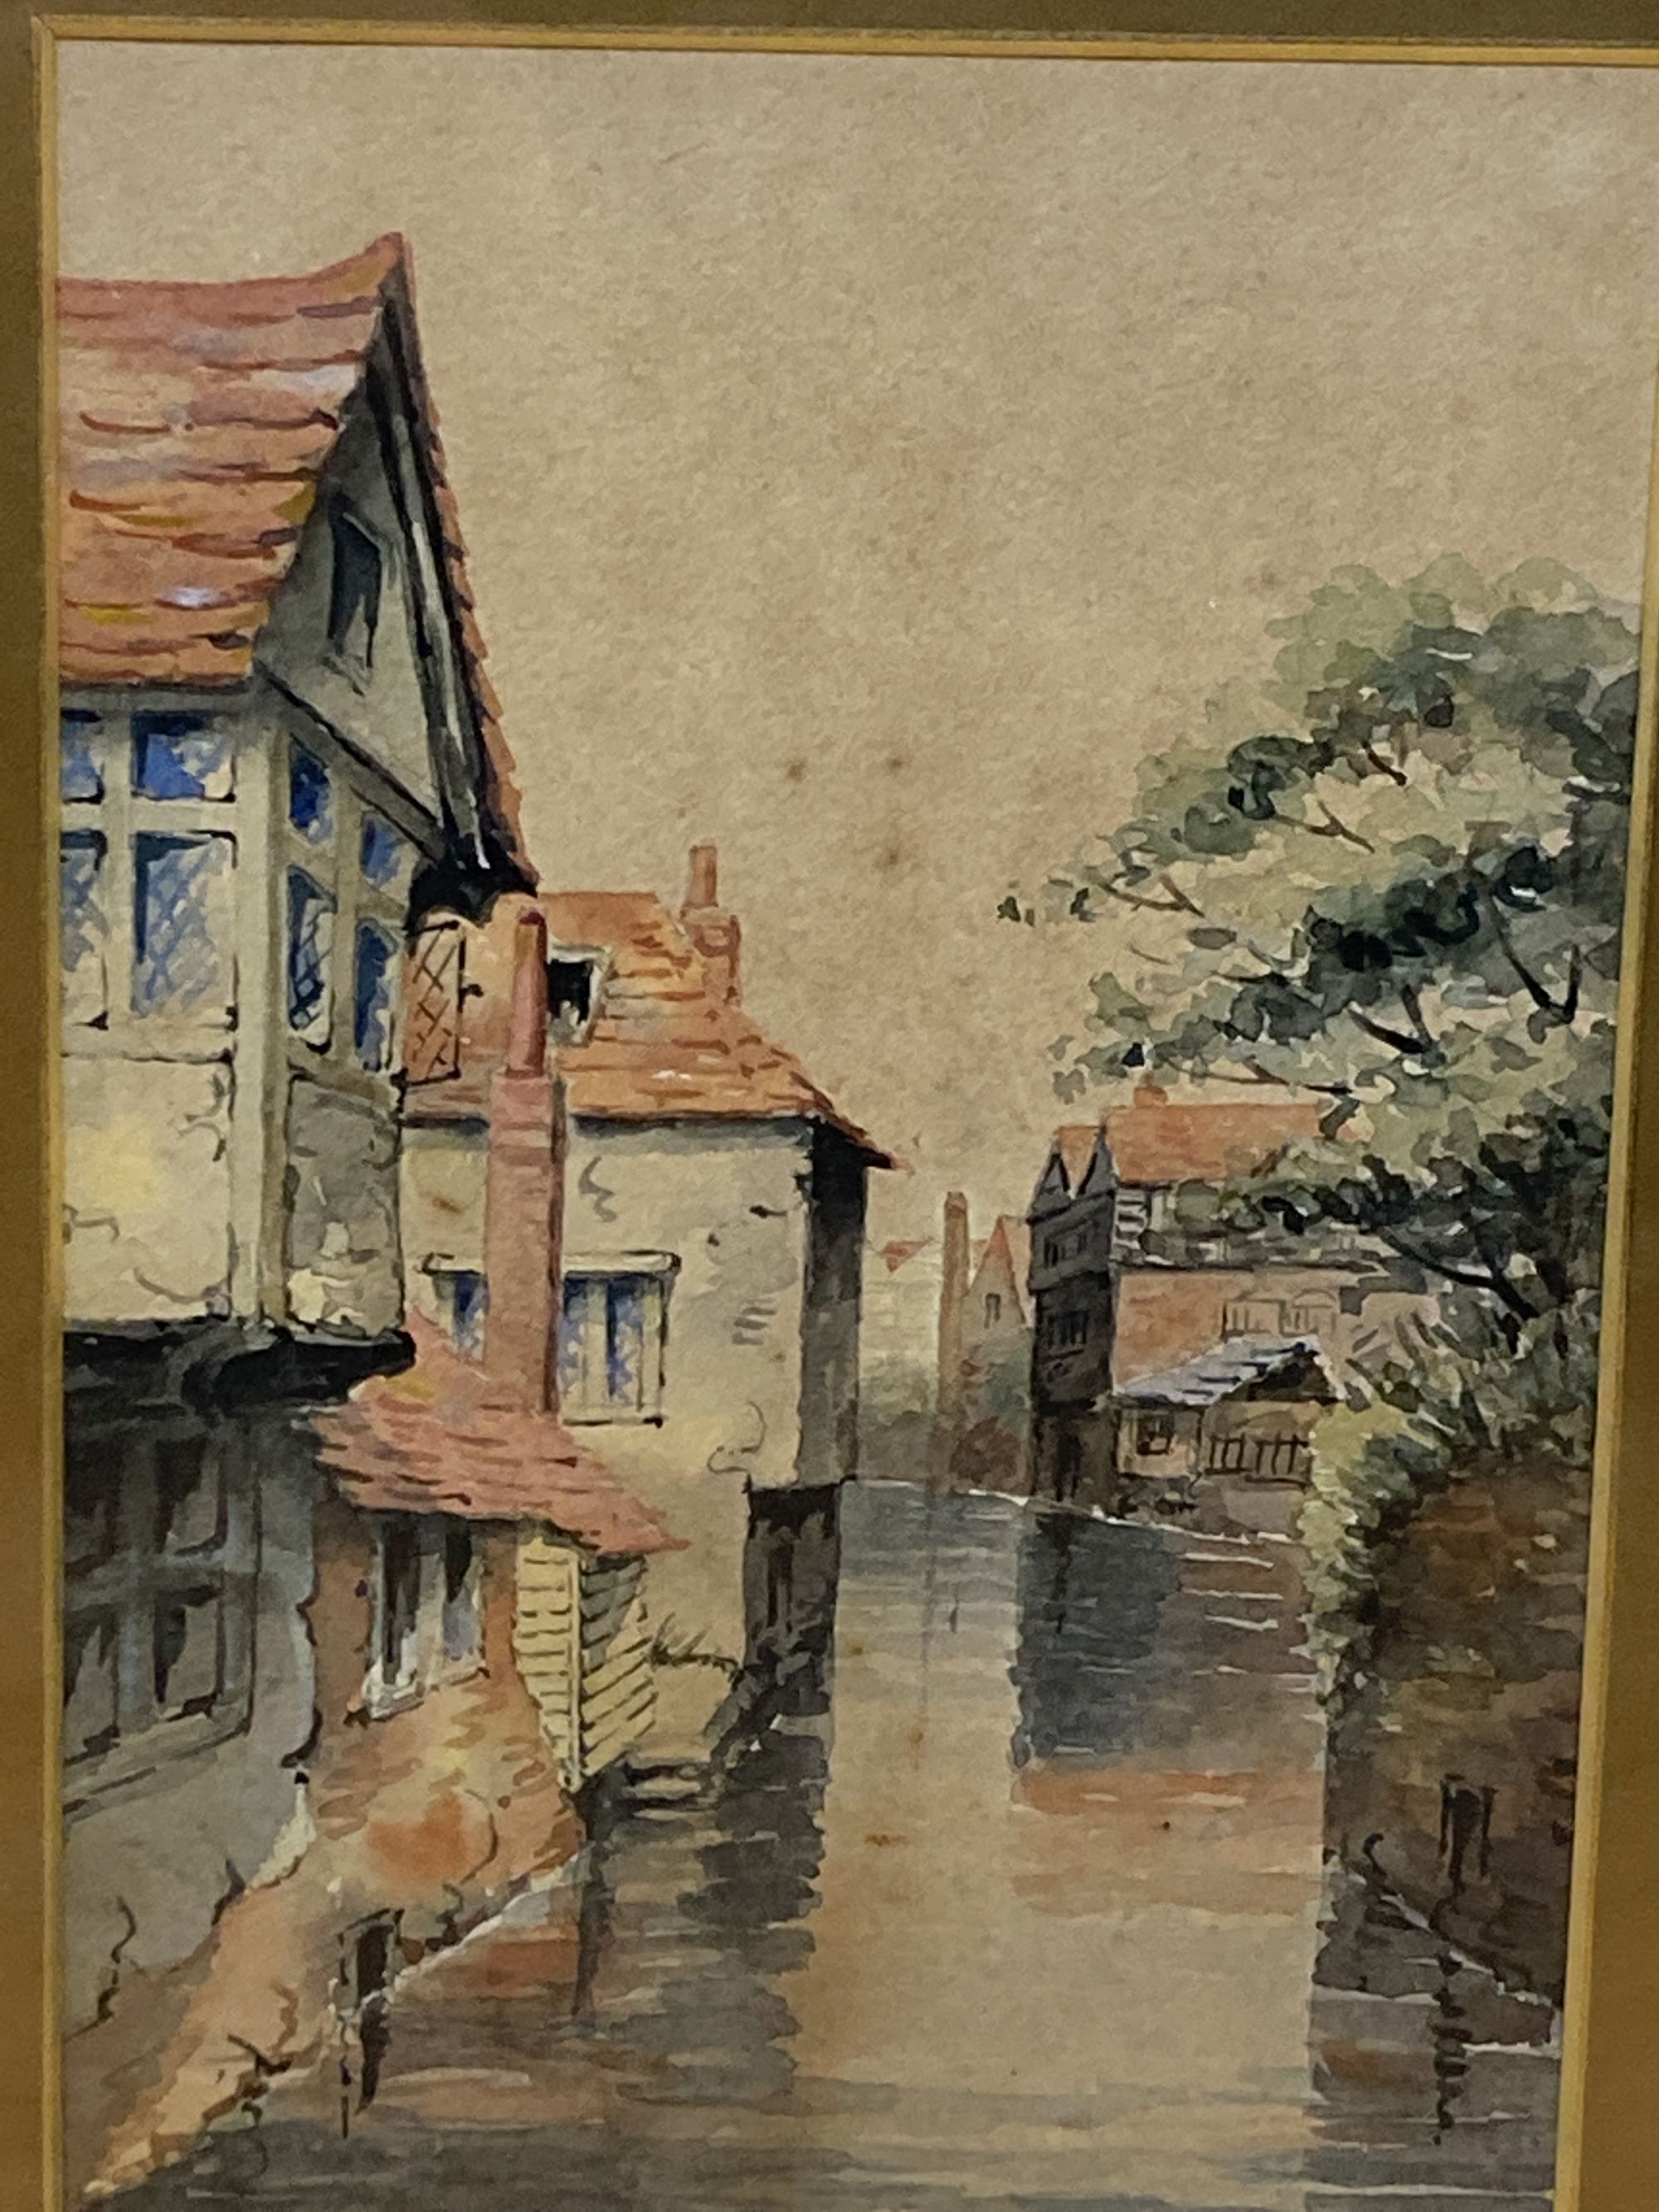 Cleo, two watercolours, Blackfriars and Kings Bridge, Canterbury, titled, dated 1889 and signed verso, each 18 x 13cm